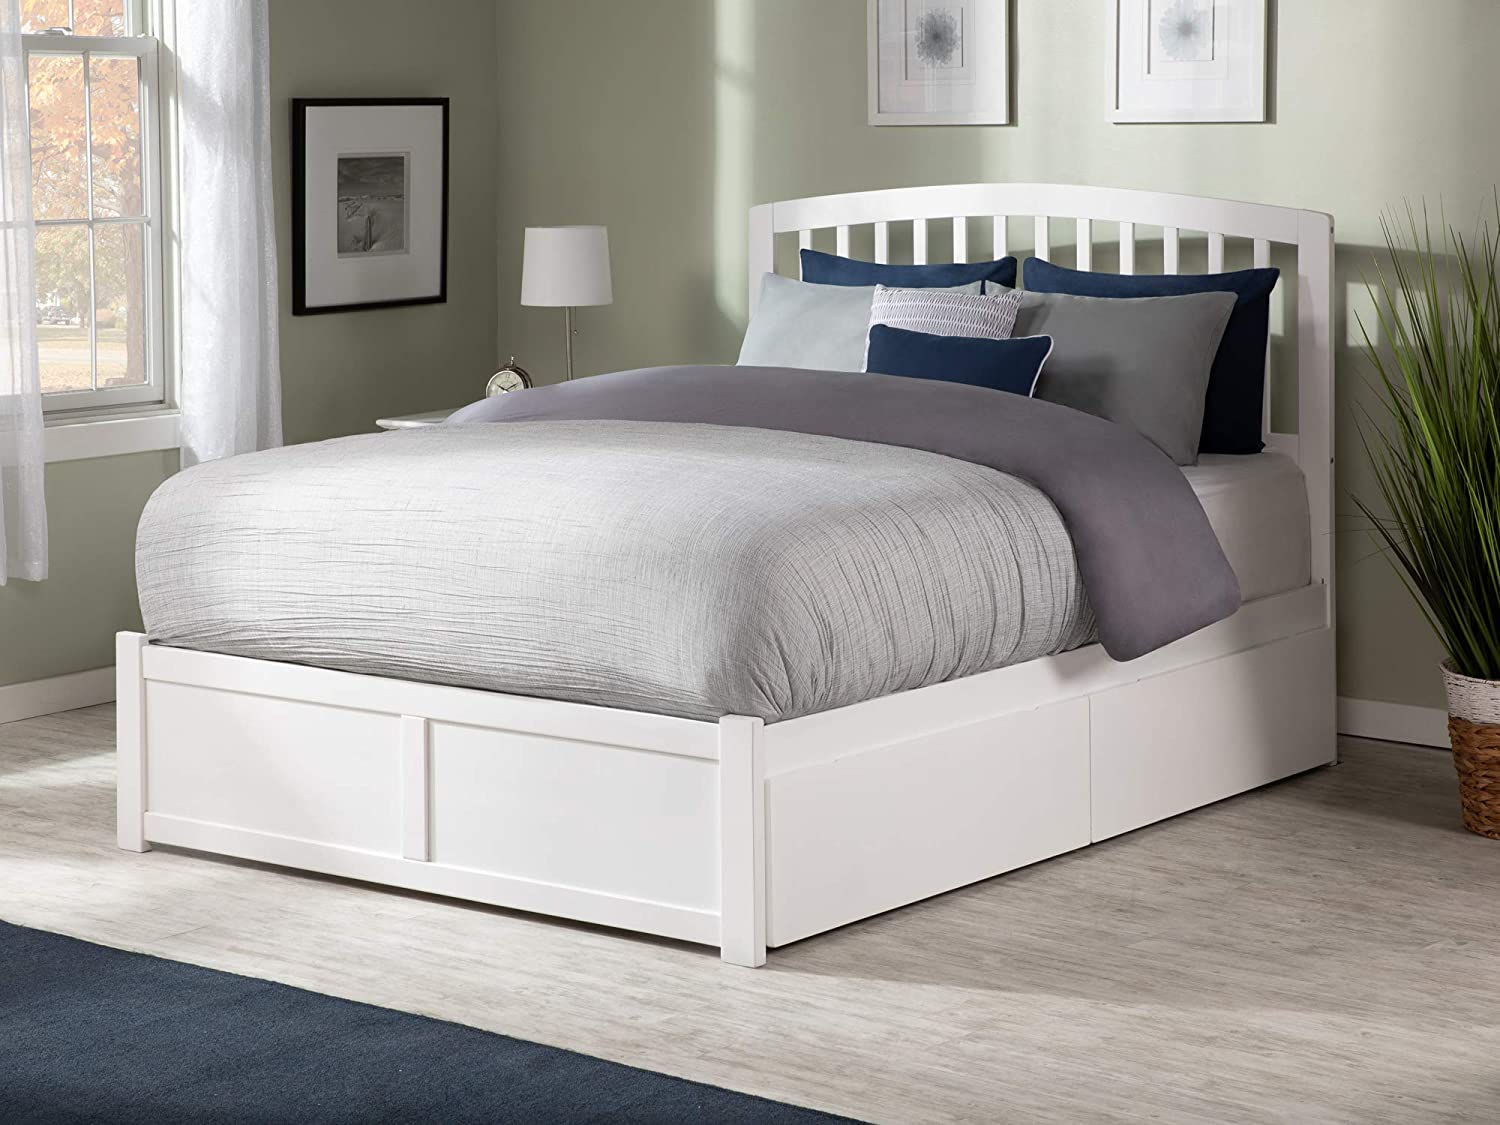 AFI AR8832112 Richmond Platform Bed with 2 Urban Bed Drawers, Full, White